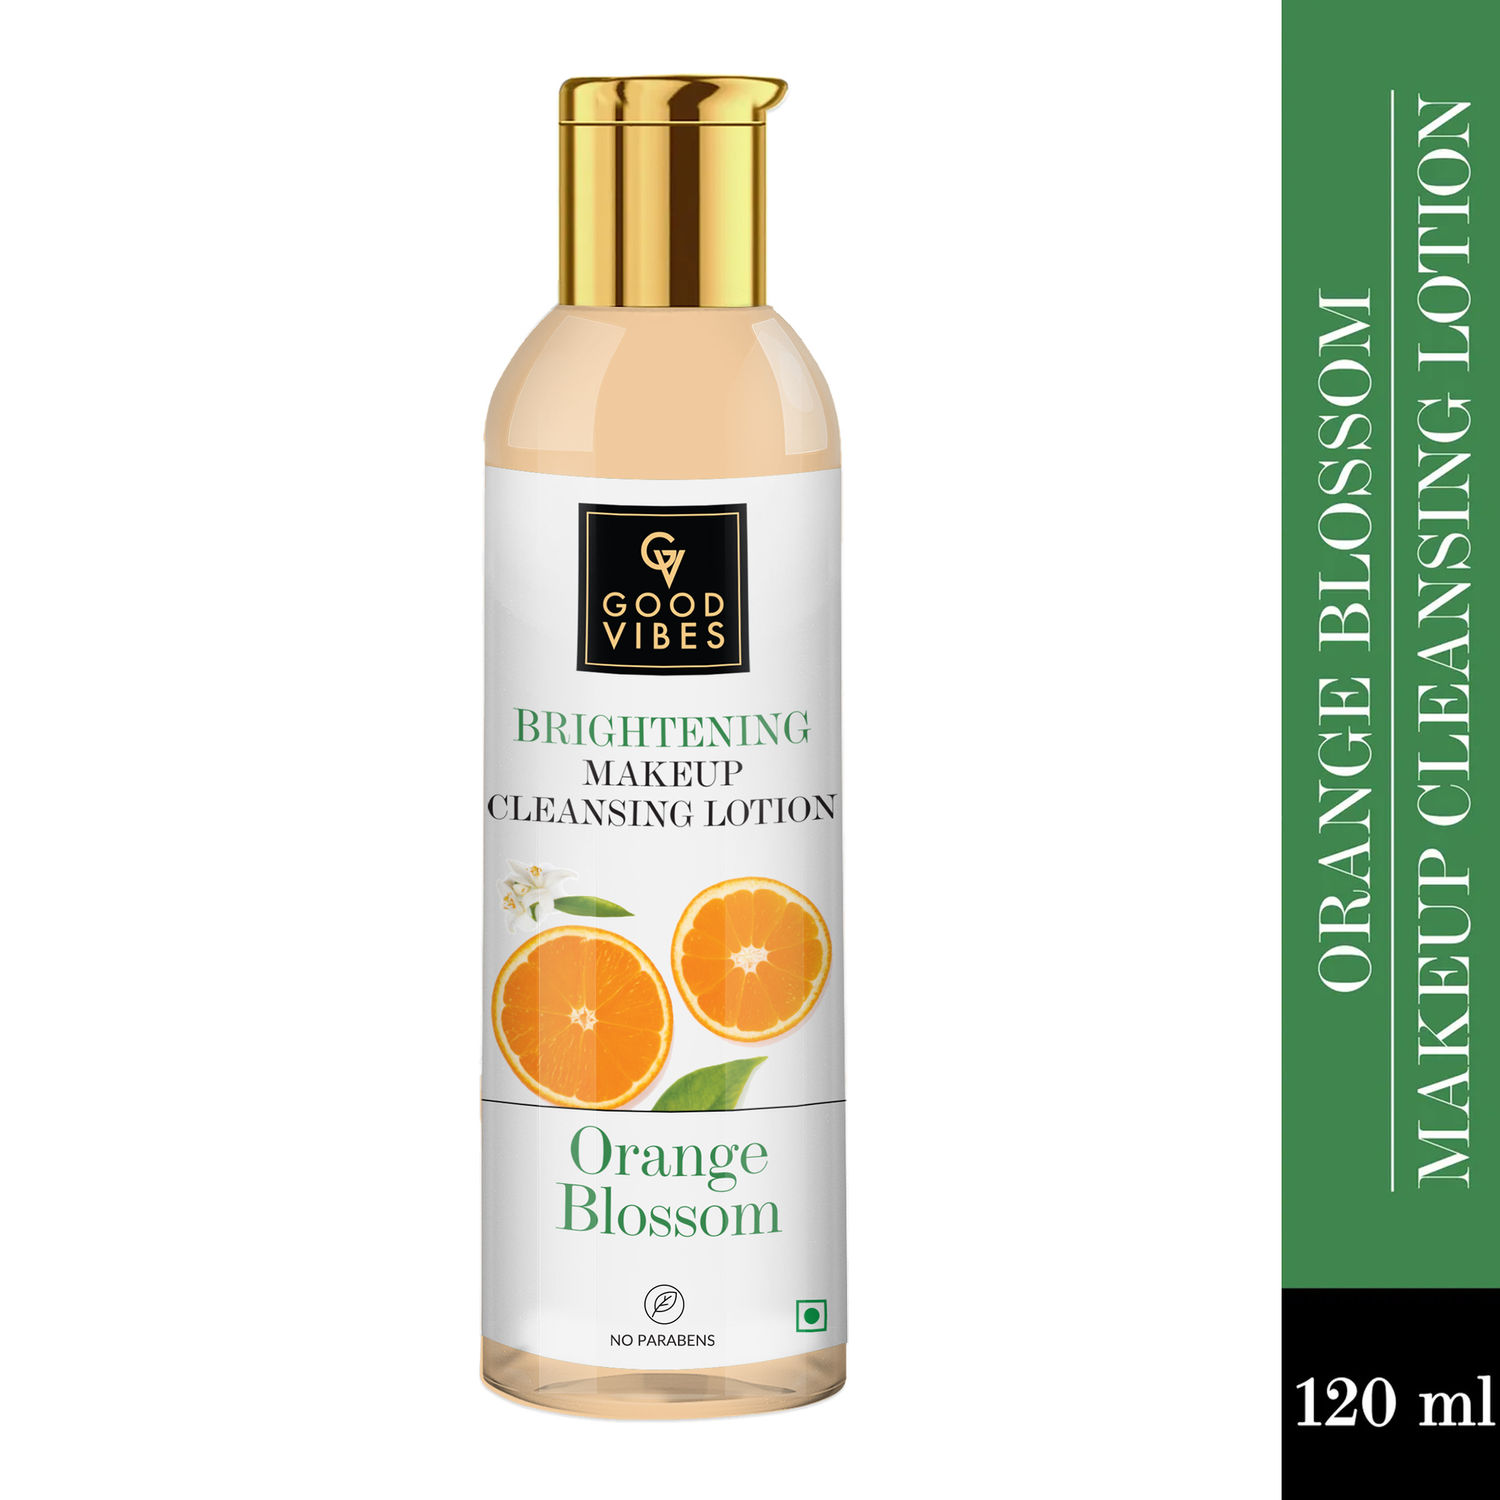 Buy Good Vibes Orange Blossom Brightening Makeup Cleansing Lotion | Cleansing, Hydrating, Refreshing | No Parabens, No Animal Testing (120 ml) - Purplle